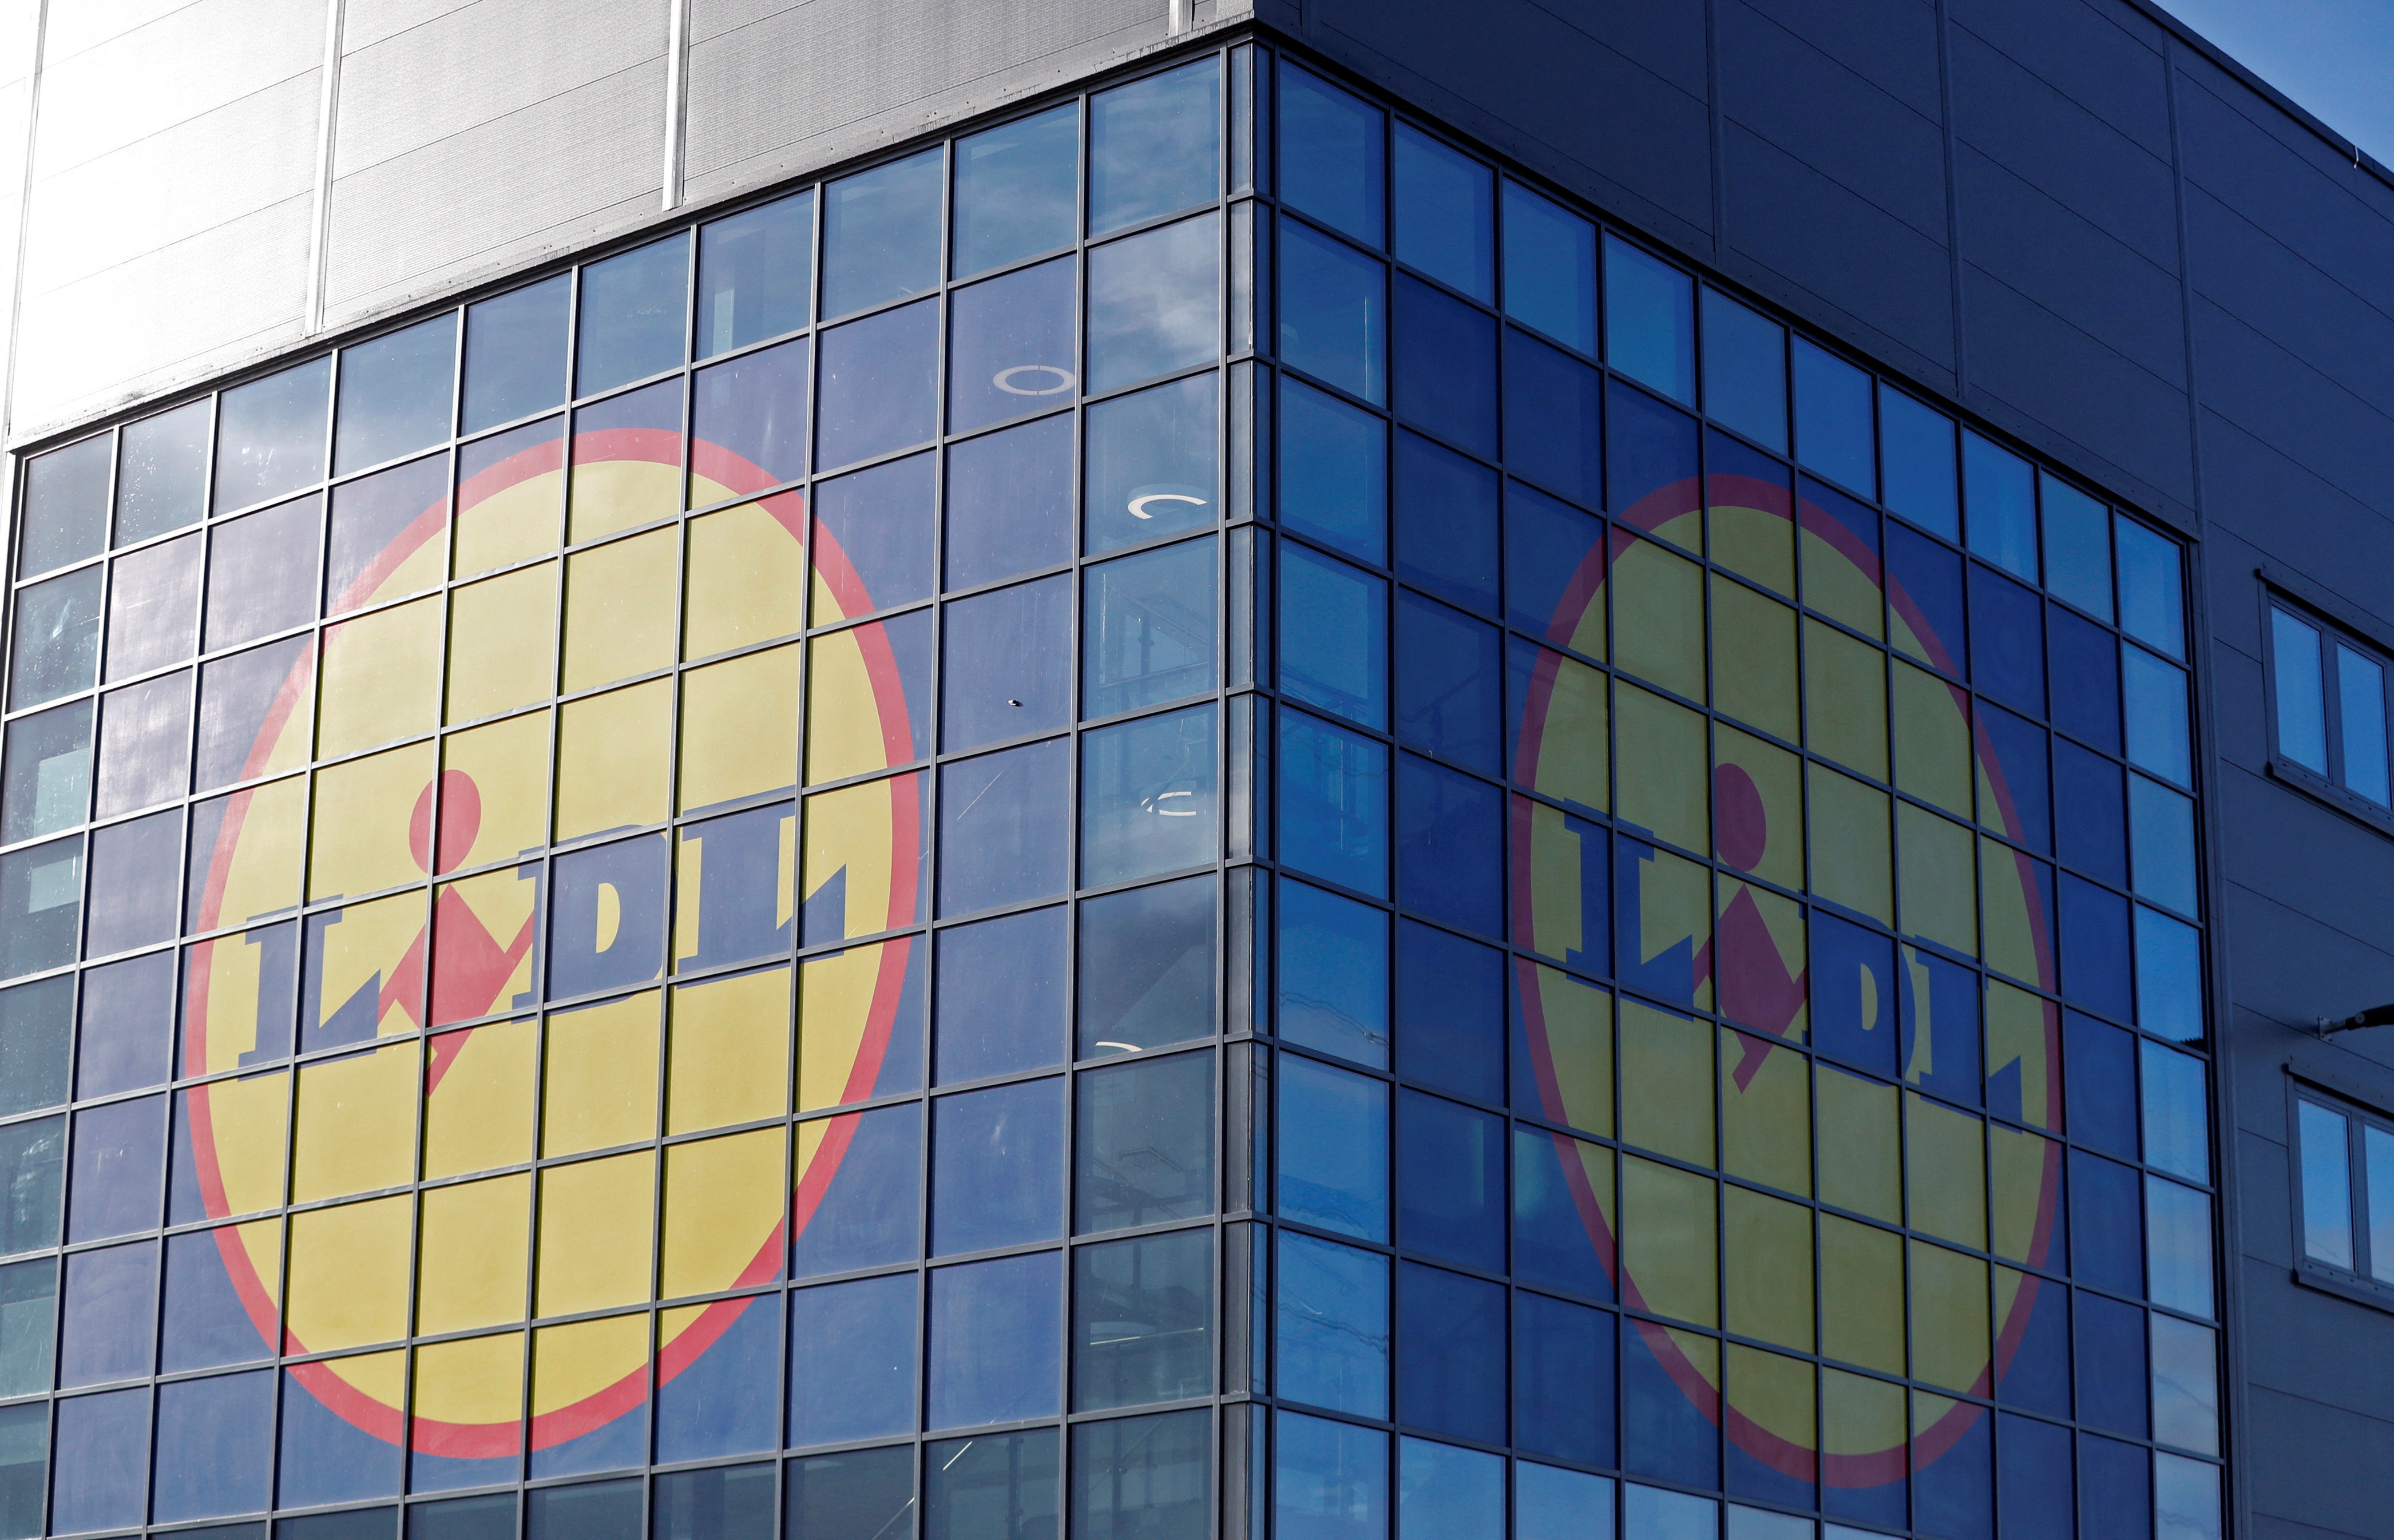 Lidl's logos are seen on the exterior of its distribution centre in Motherwell, Scotland